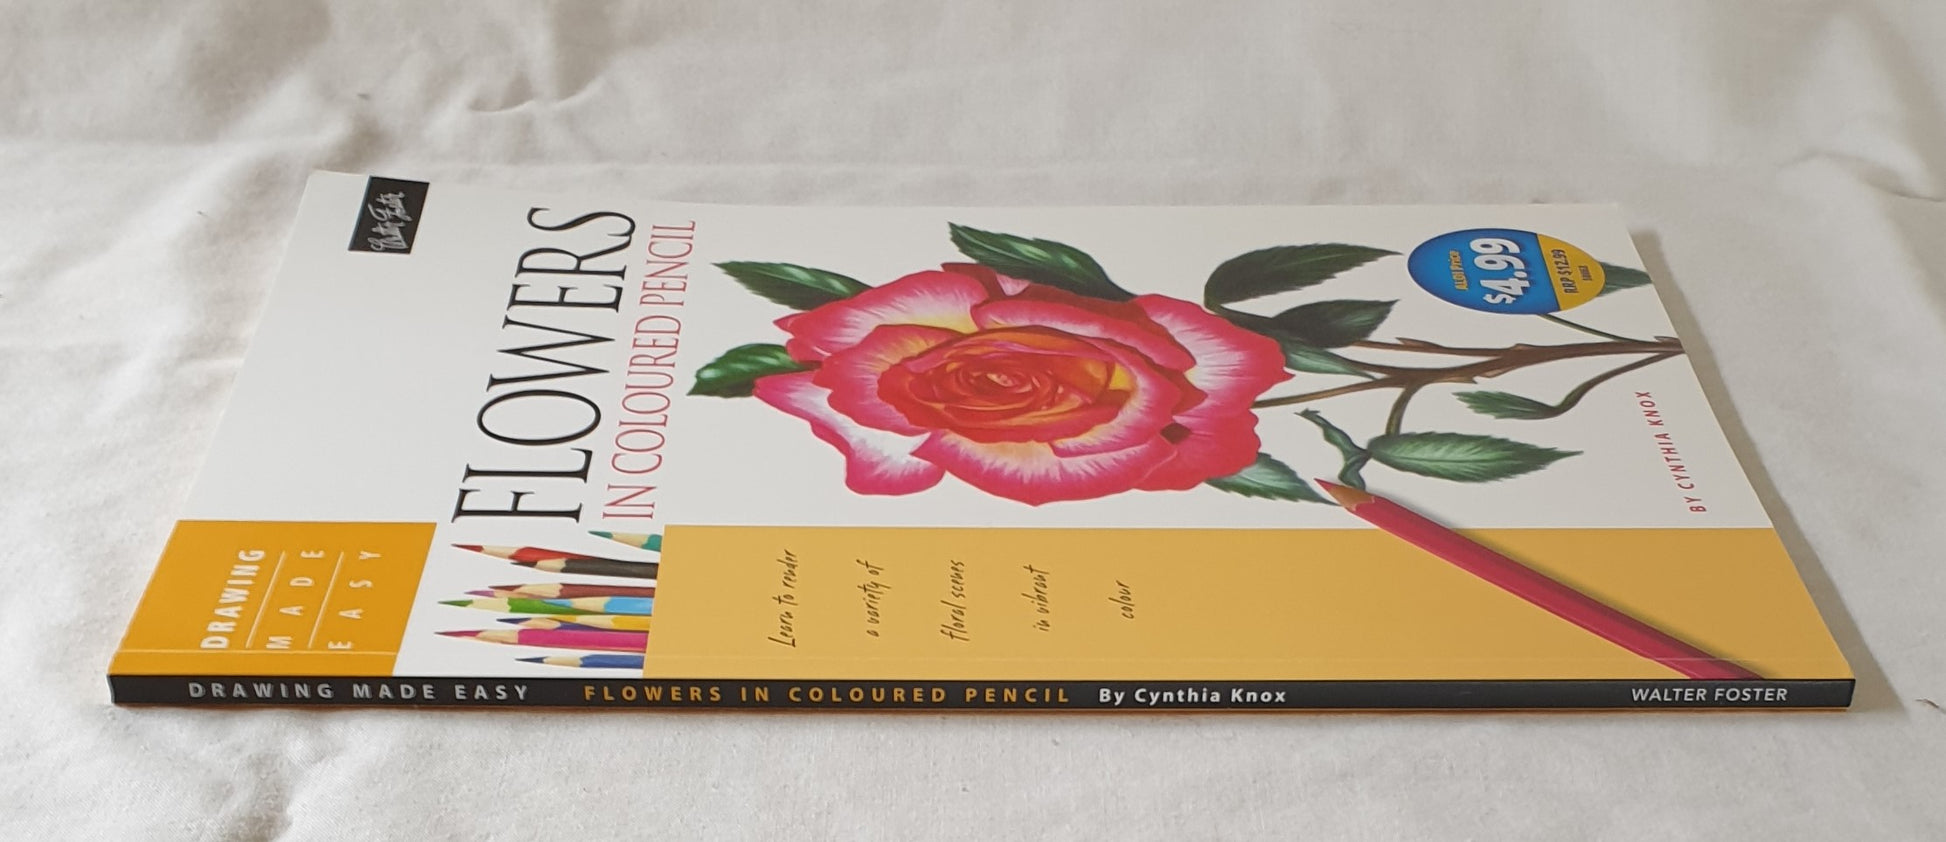 Flowers in Coloured Pencil  Learn to render a variety of floral scenes in vibrant colour  by Cynthia Knox  Walter Foster – Drawing Made Easy